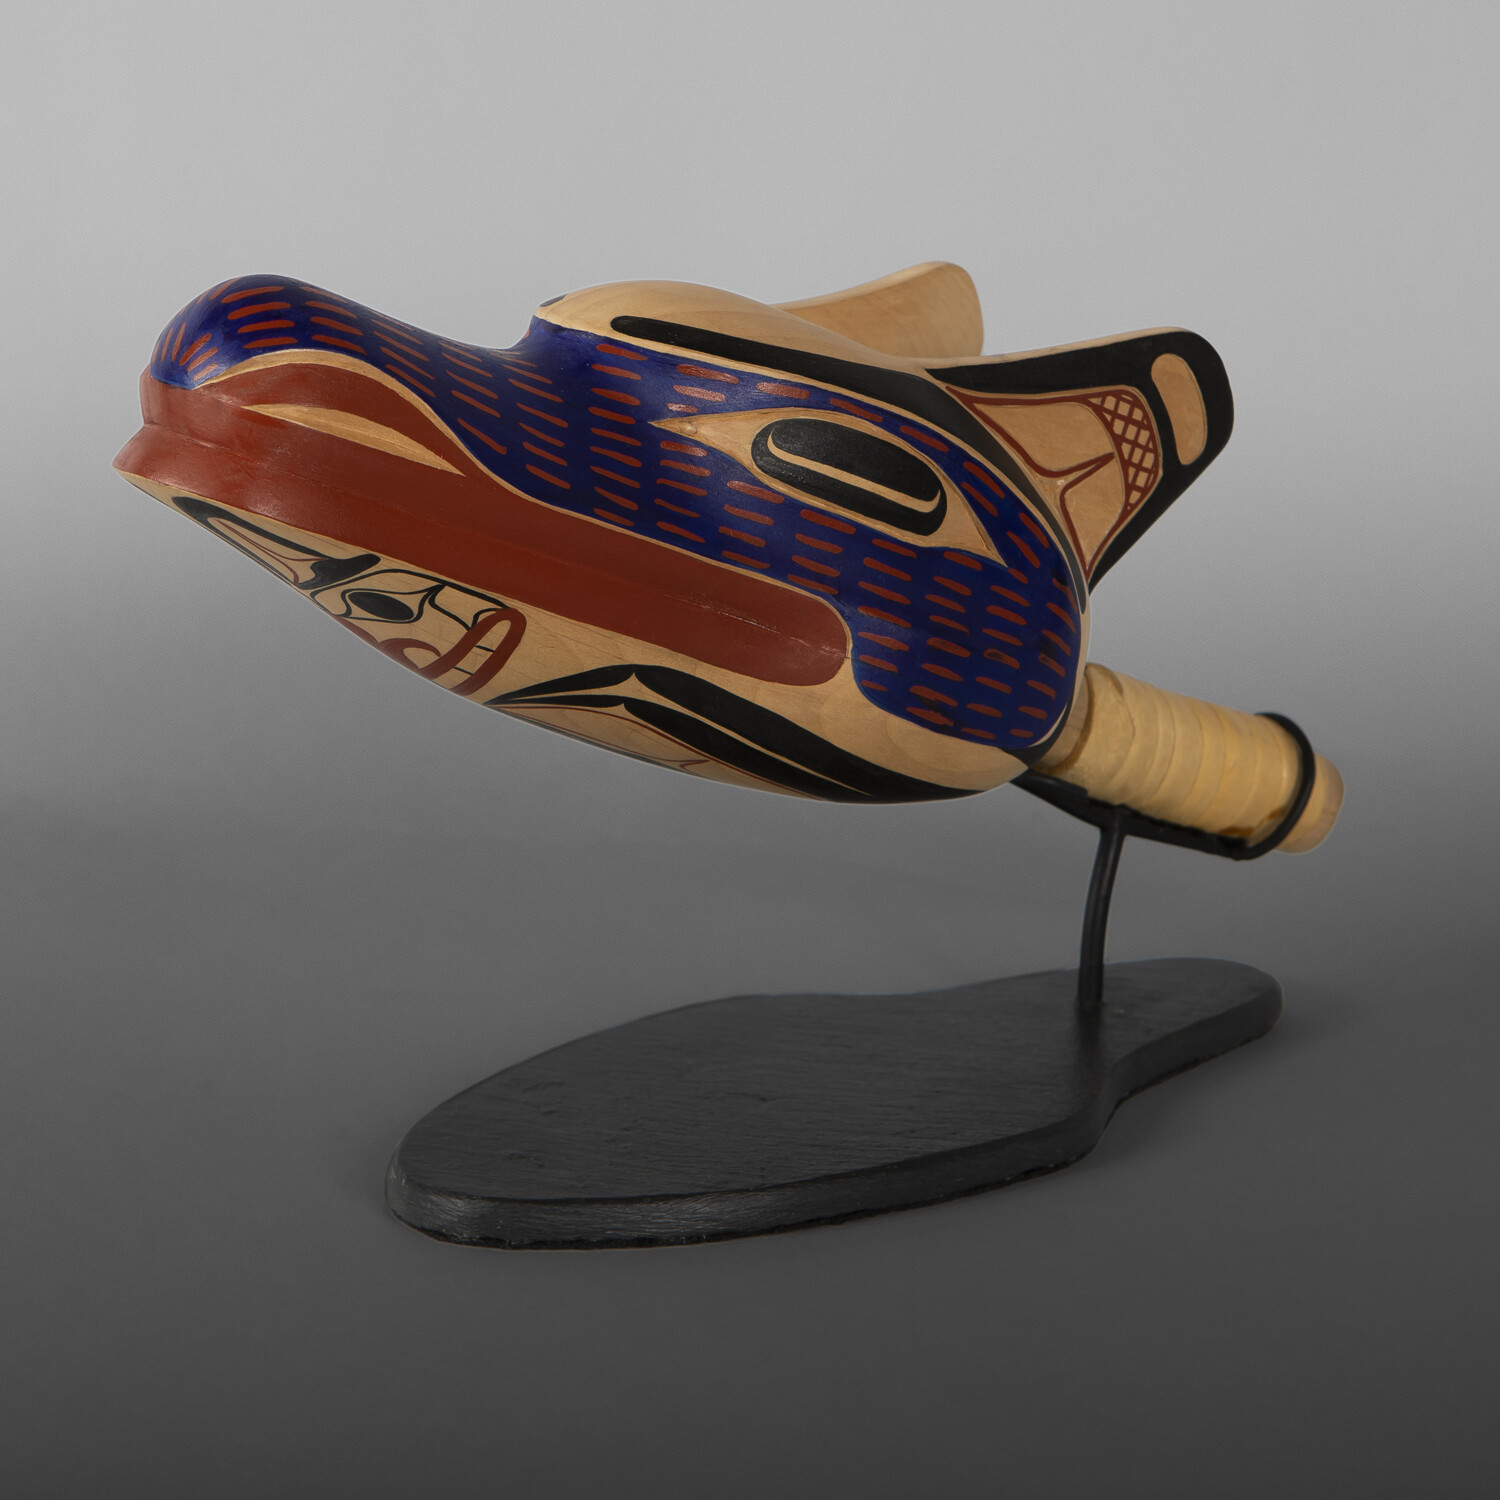 Wolf Rattle
David A Boxley
Tsimshian
Alder, leather, paint, beads, custom stand
12" x 4" x 4" x (&"  high with stand)
$5800